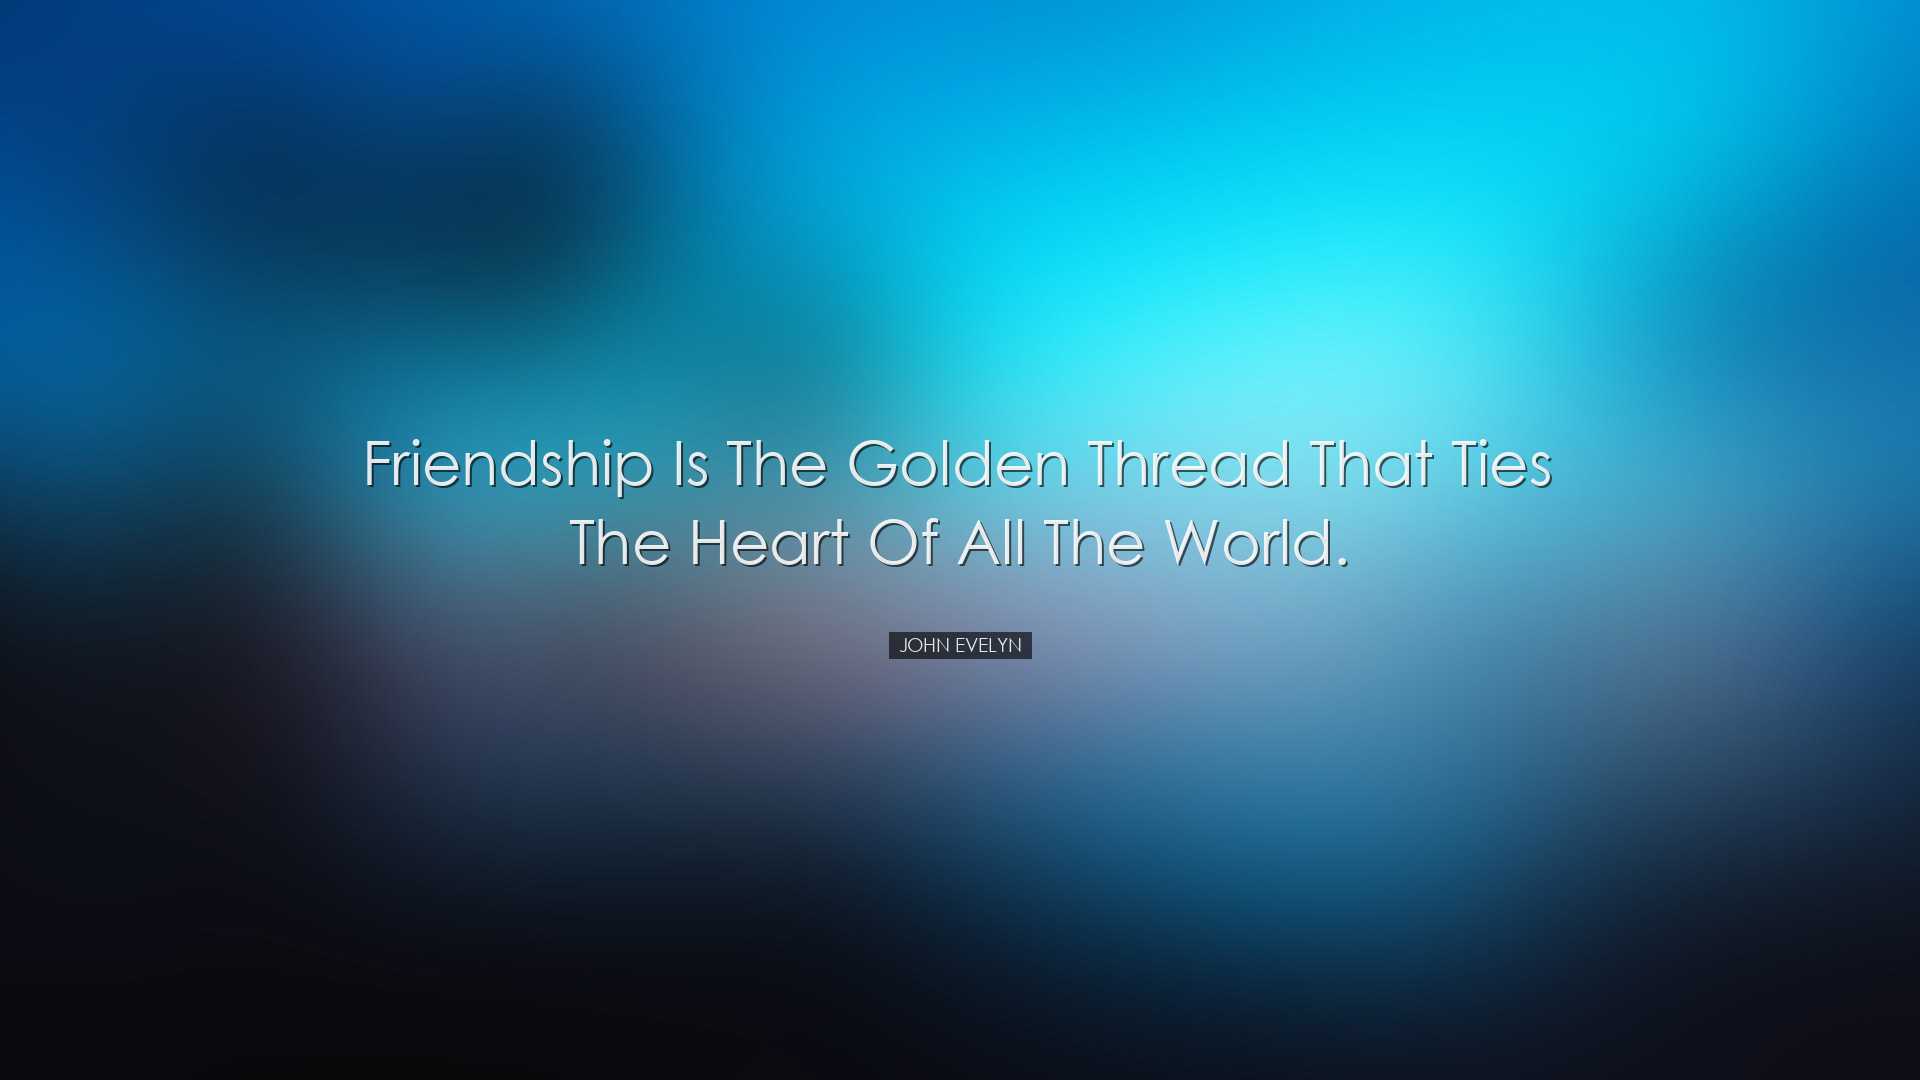 Friendship is the golden thread that ties the heart of all the wor